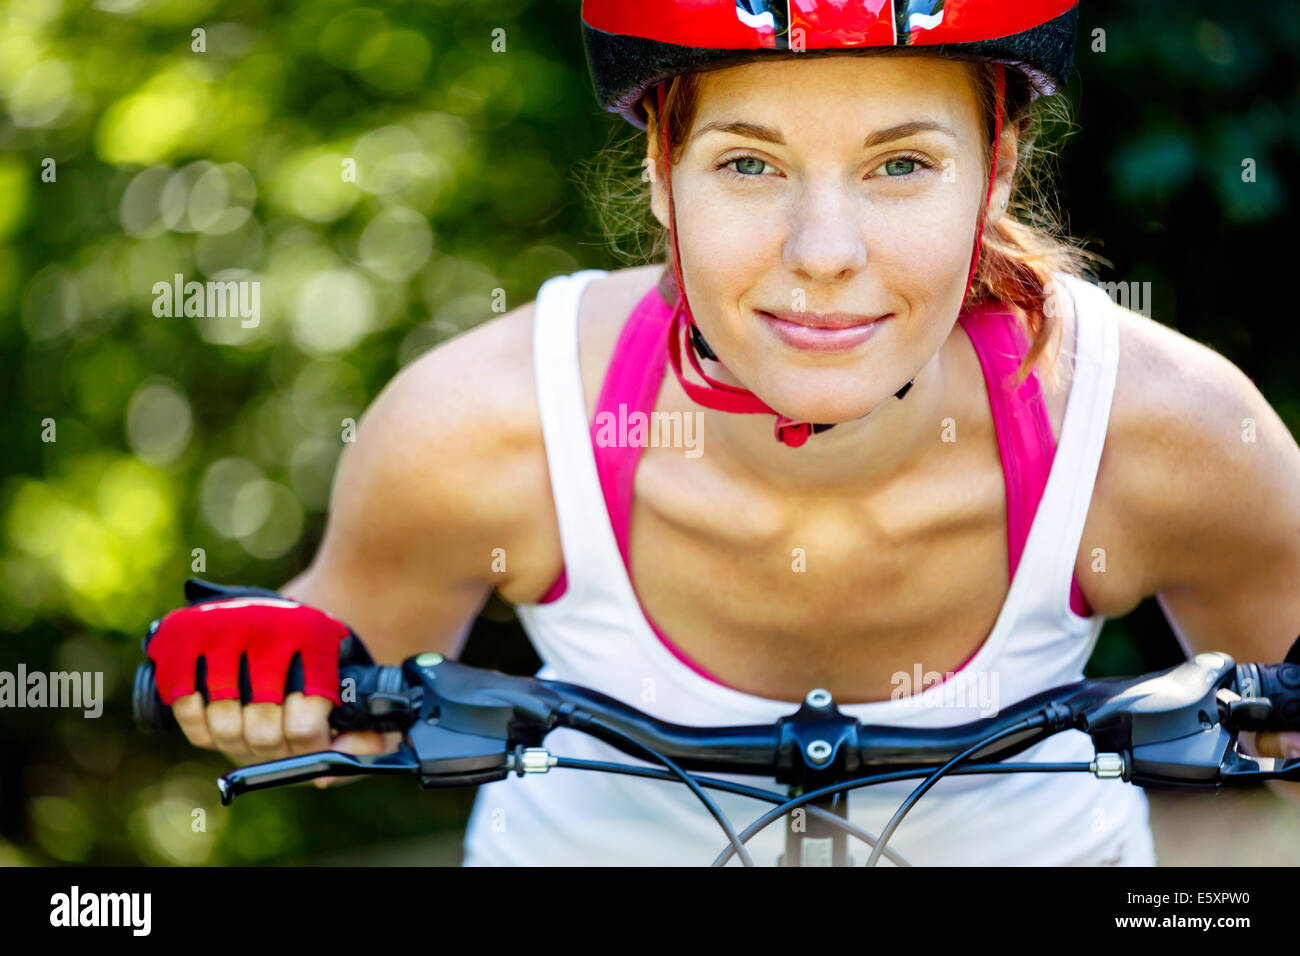 Happy Young woman leaned over the handlebars of her bike. Stock Photo